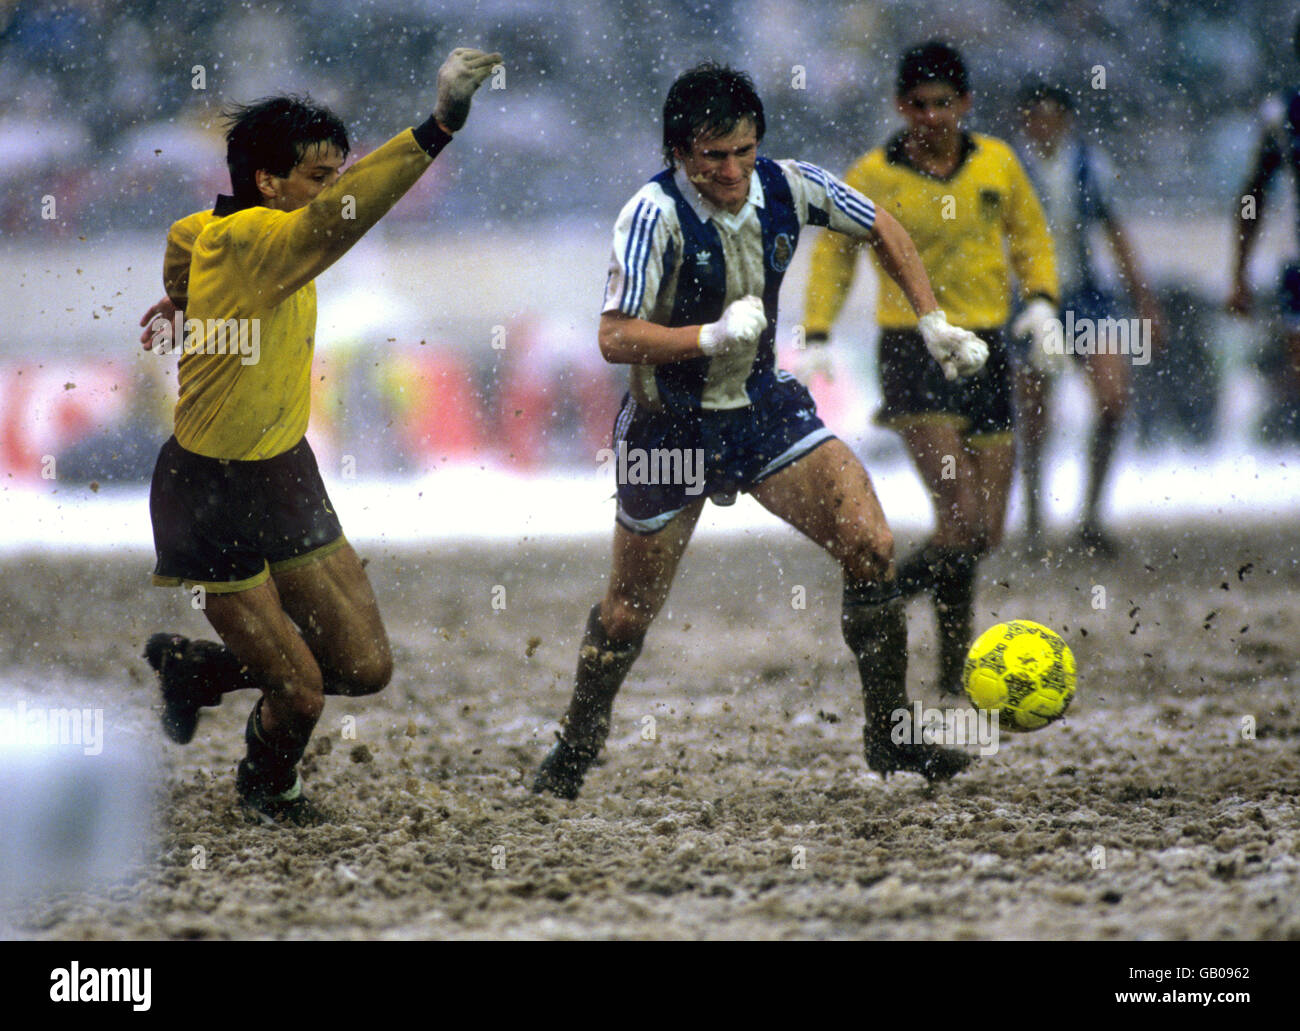 Soccer - Intercontinental Cup Final - Toyota Cup - FC Porto v C.A. Penarol - National Stadium - Tokyo. General action from the match as the players struggle in the extreme conditions Stock Photo